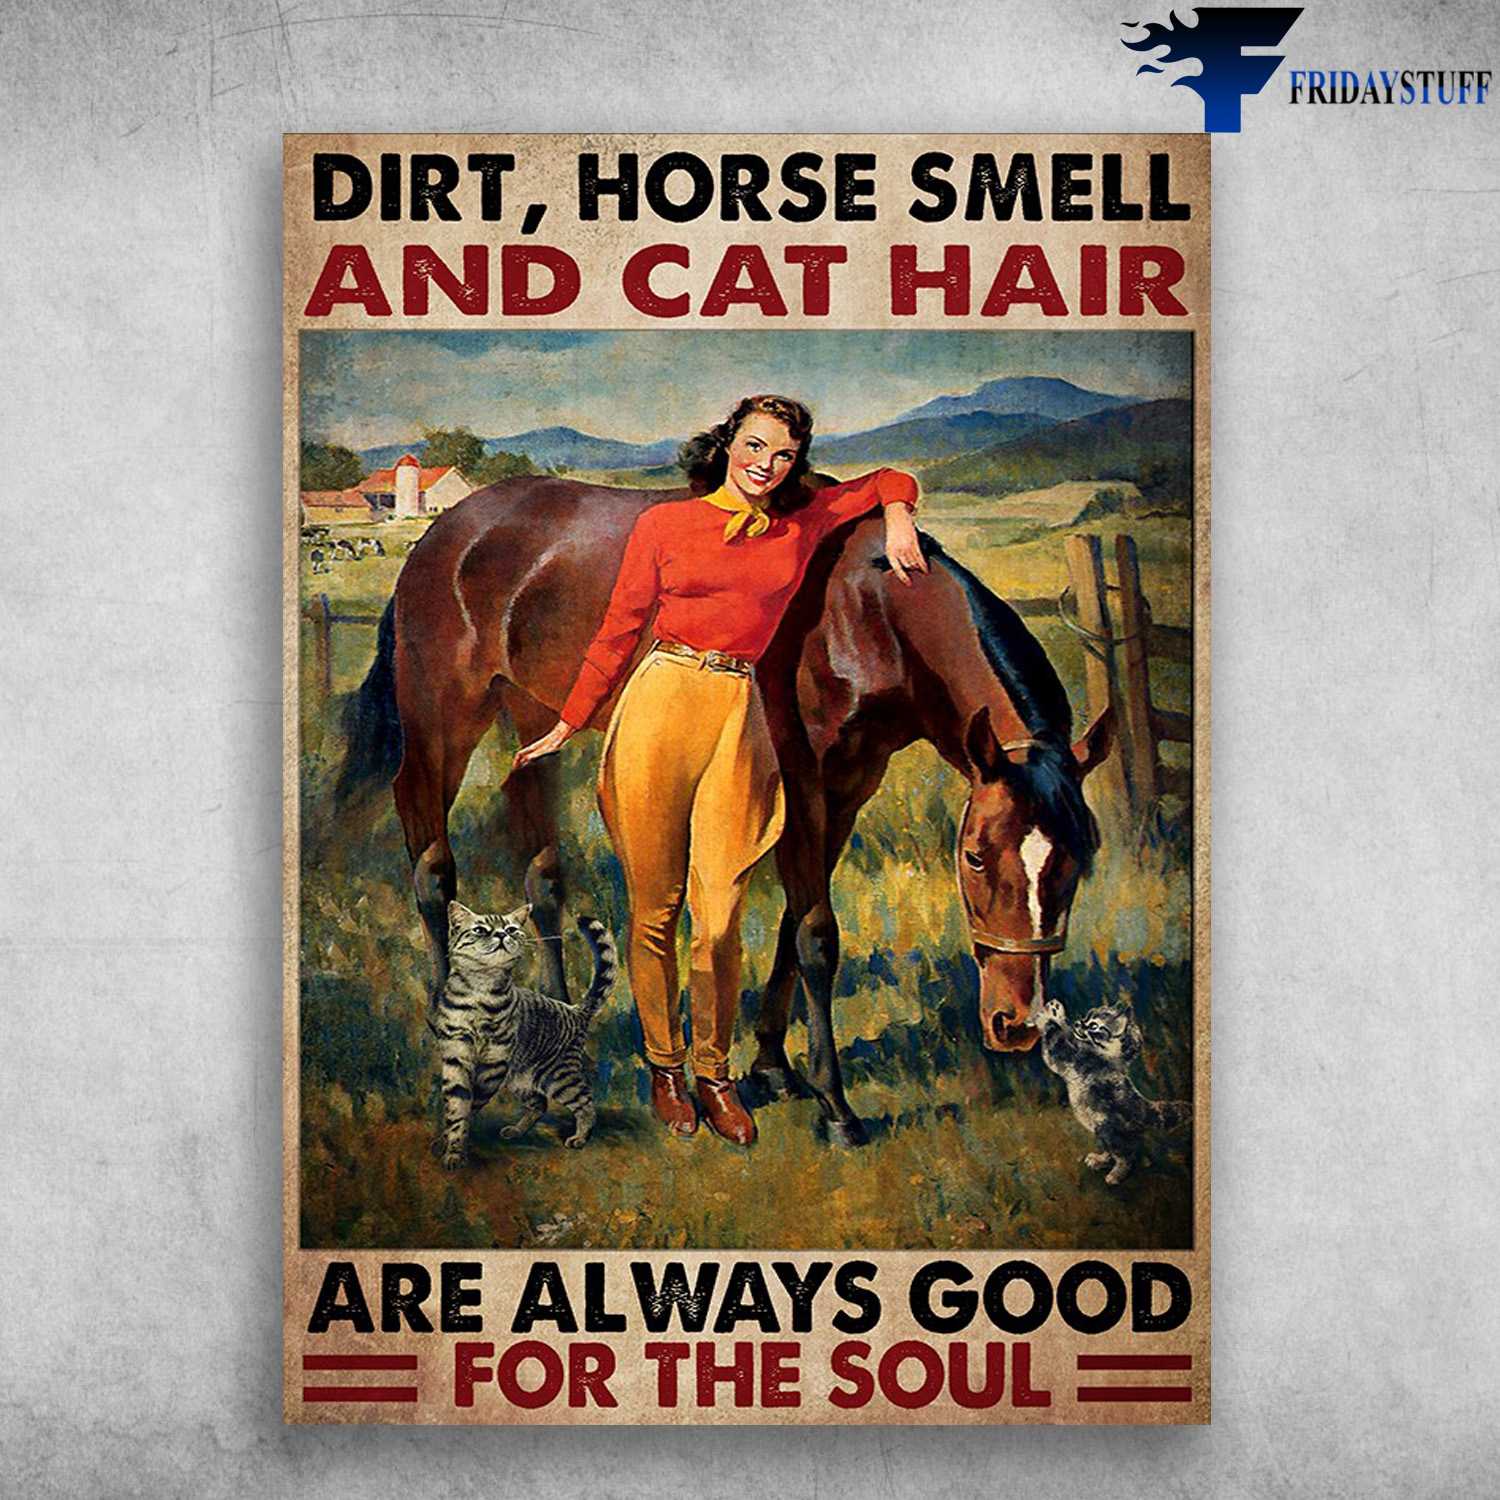 Lady Loves Cat And Horse - Dirt, Horse Smell, And Cat Hair, Are Always Good, For The Soul